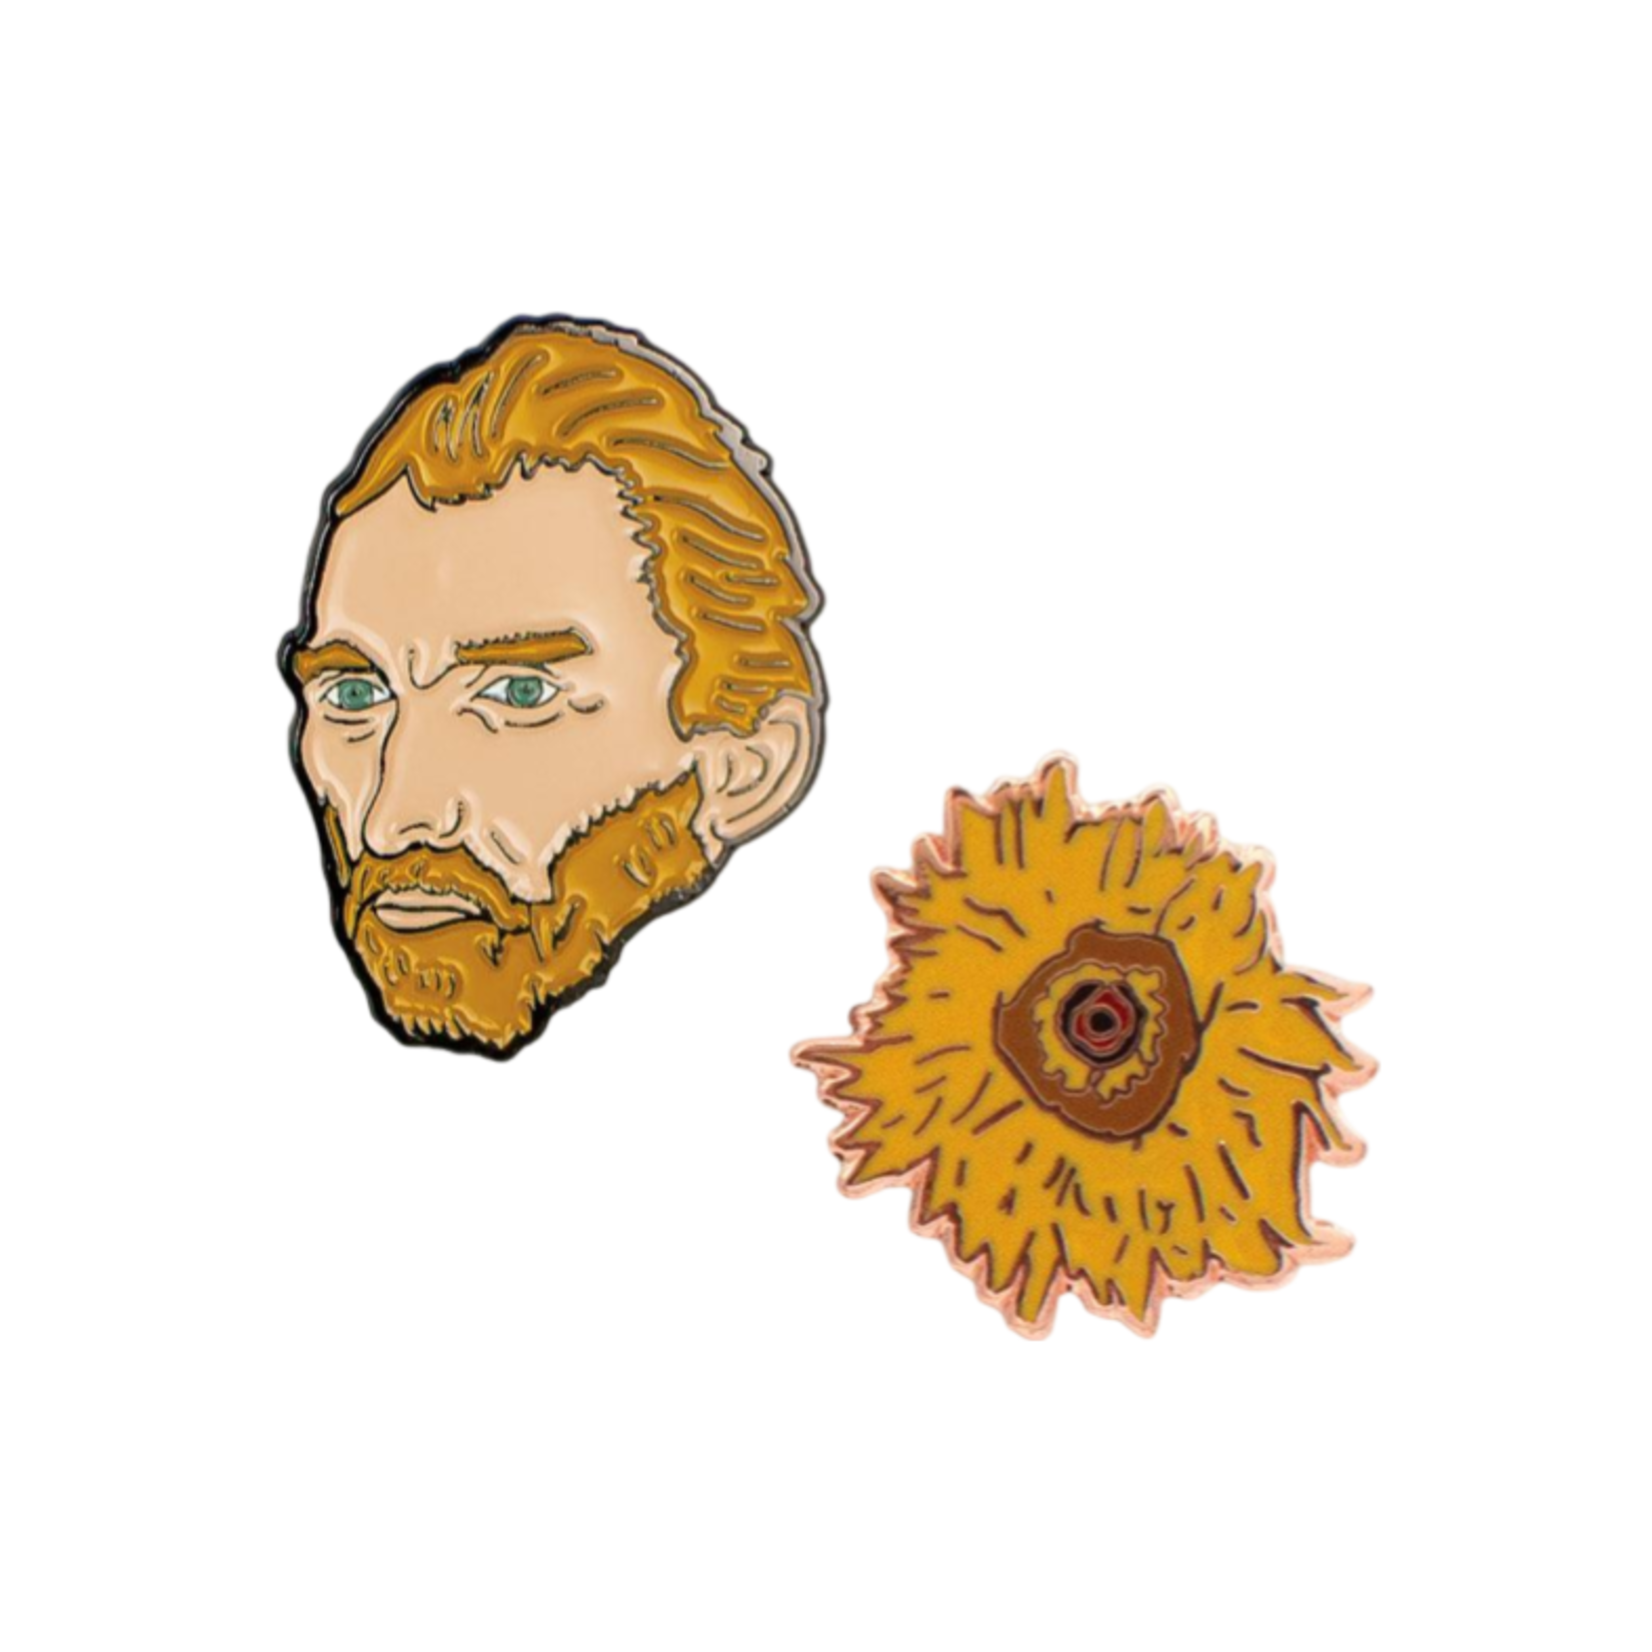 UNEMPLOYED PHILOSOPHERS GUILD VAN GOGH AND SUNFLOWER PINS